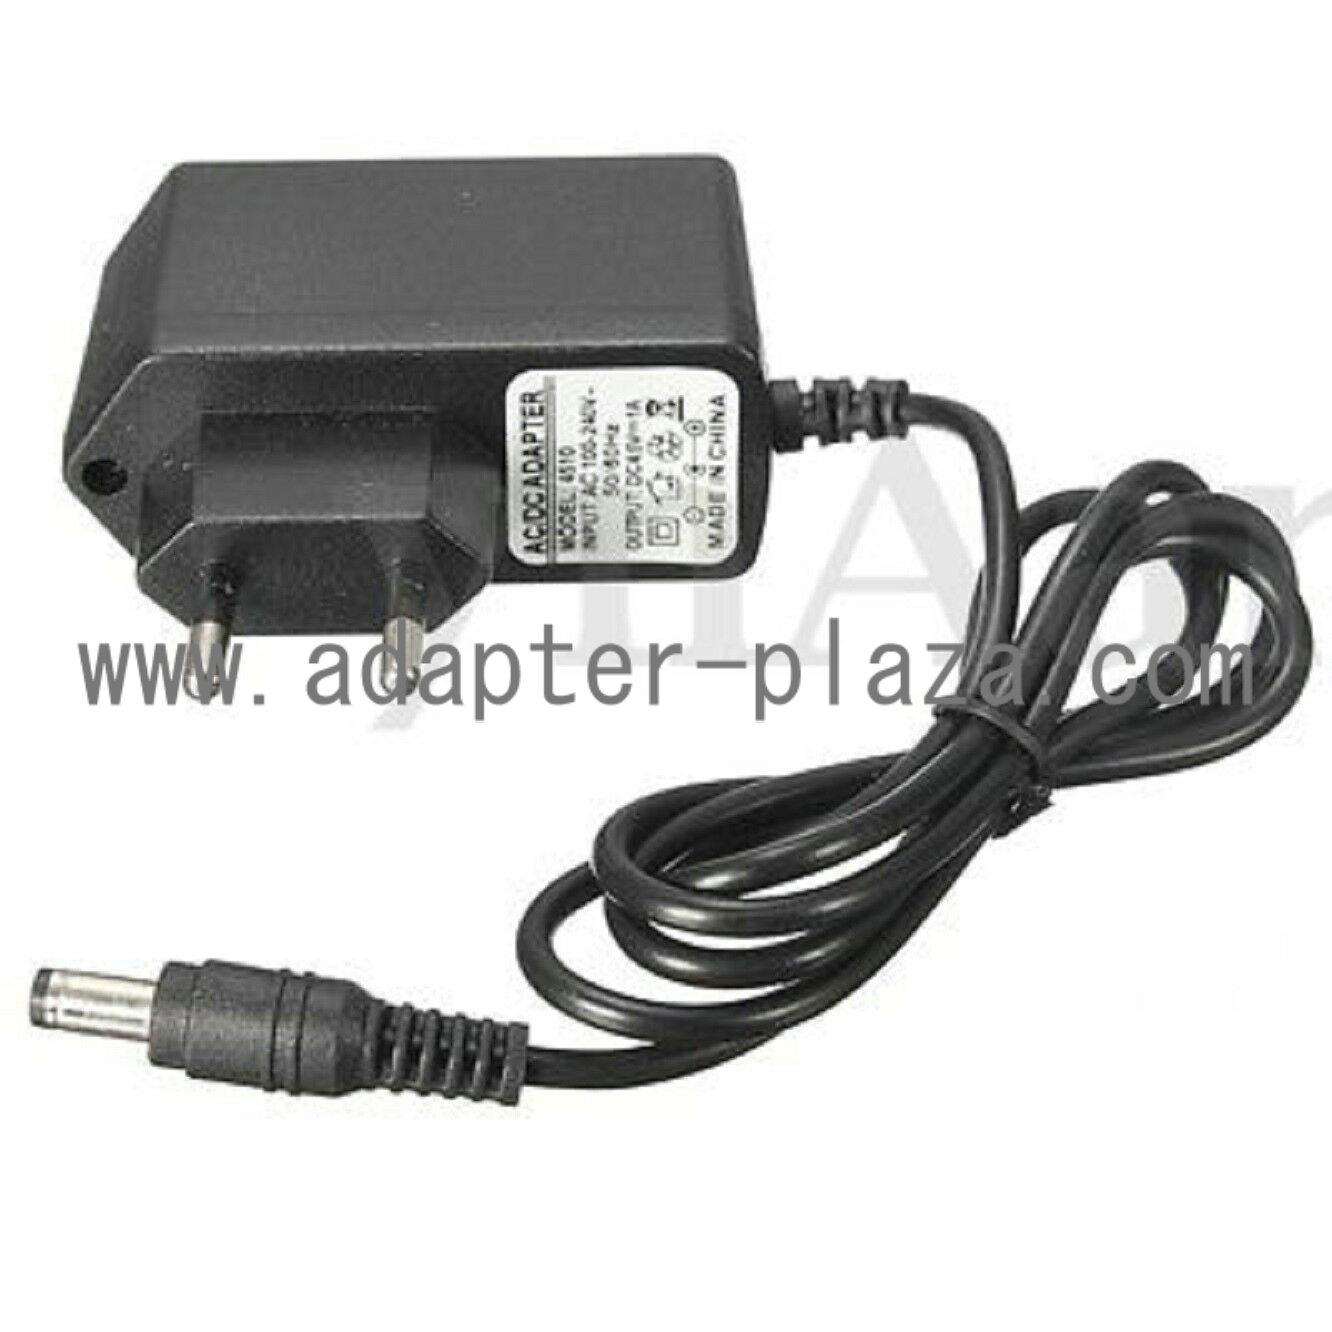 New 4.5V 1A S99 Adapter AC/DC 100-240V Switching Power Supply Charger EU barrel plug 2.5*5.5mm - Click Image to Close